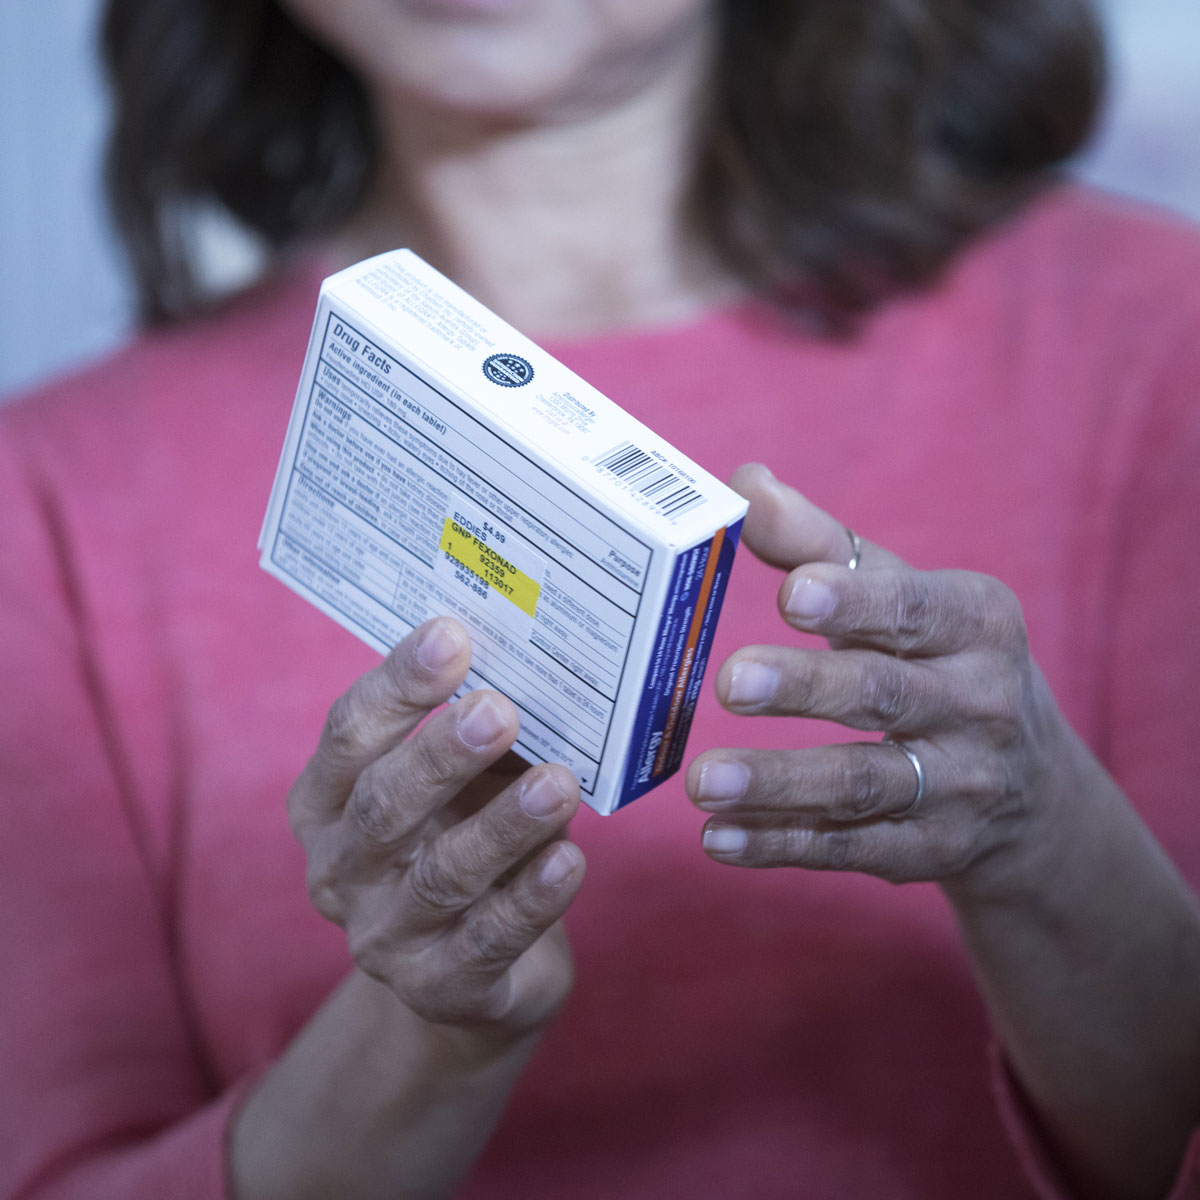 A close up image of a woman holding an over-the-counter medication.